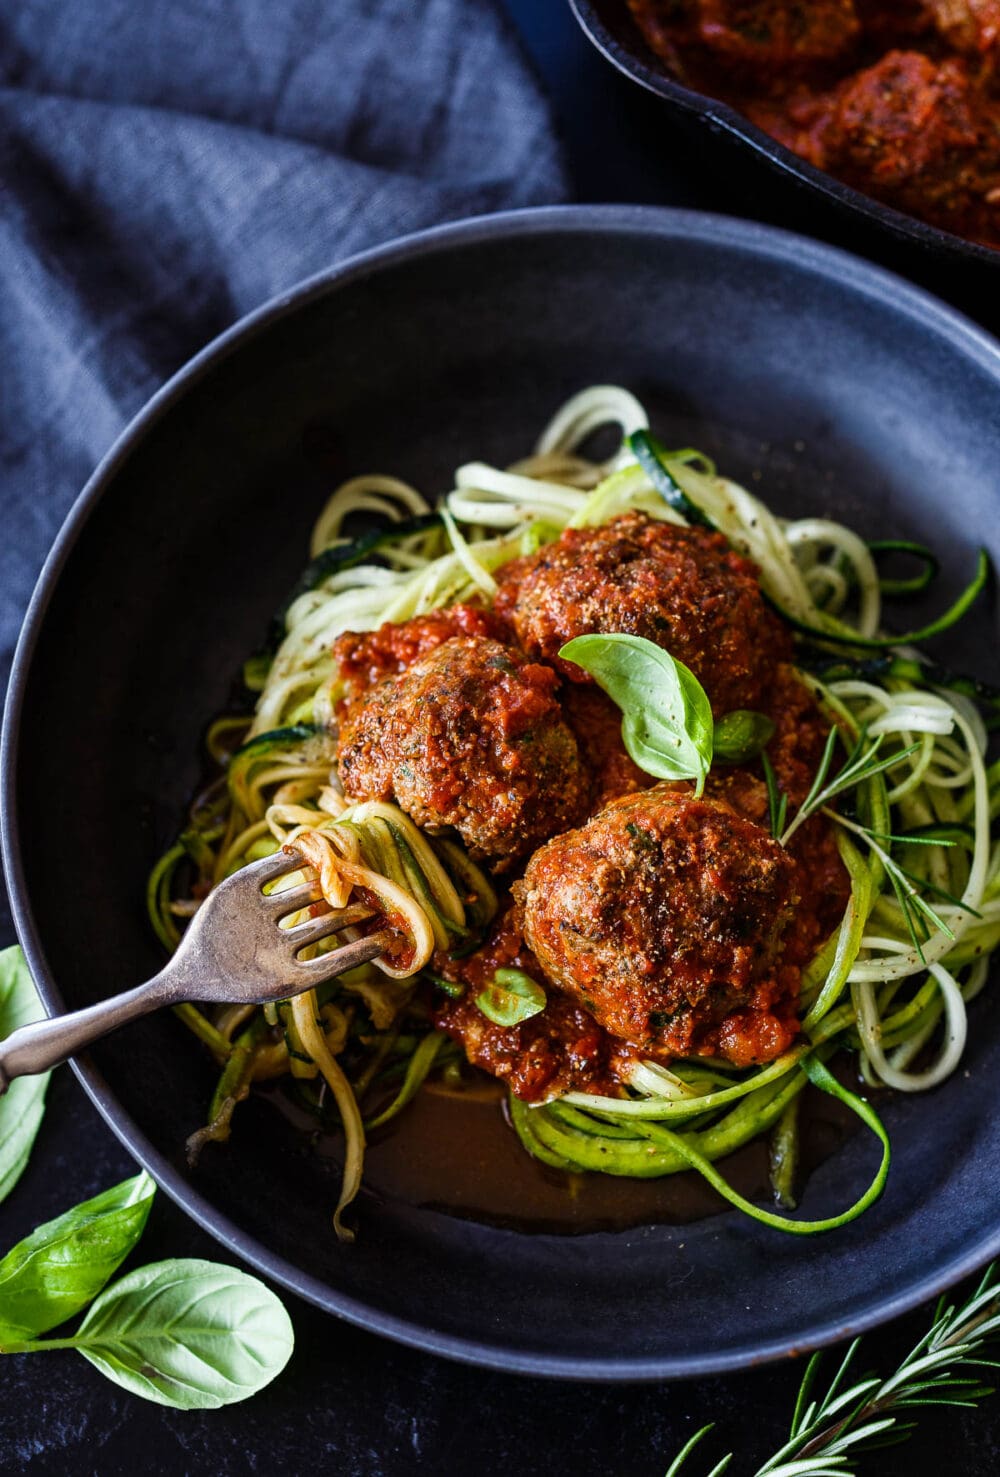 These flavorful Italian Meatballs are chock full of fresh herbs and savory goodness.  Fast and easy they can be made in 30 minutes. Serve them with zucchini noodles, roasted spaghetti squash, pasta, creamy polenta or in a roll. Low-carb, keto and gluten-free.